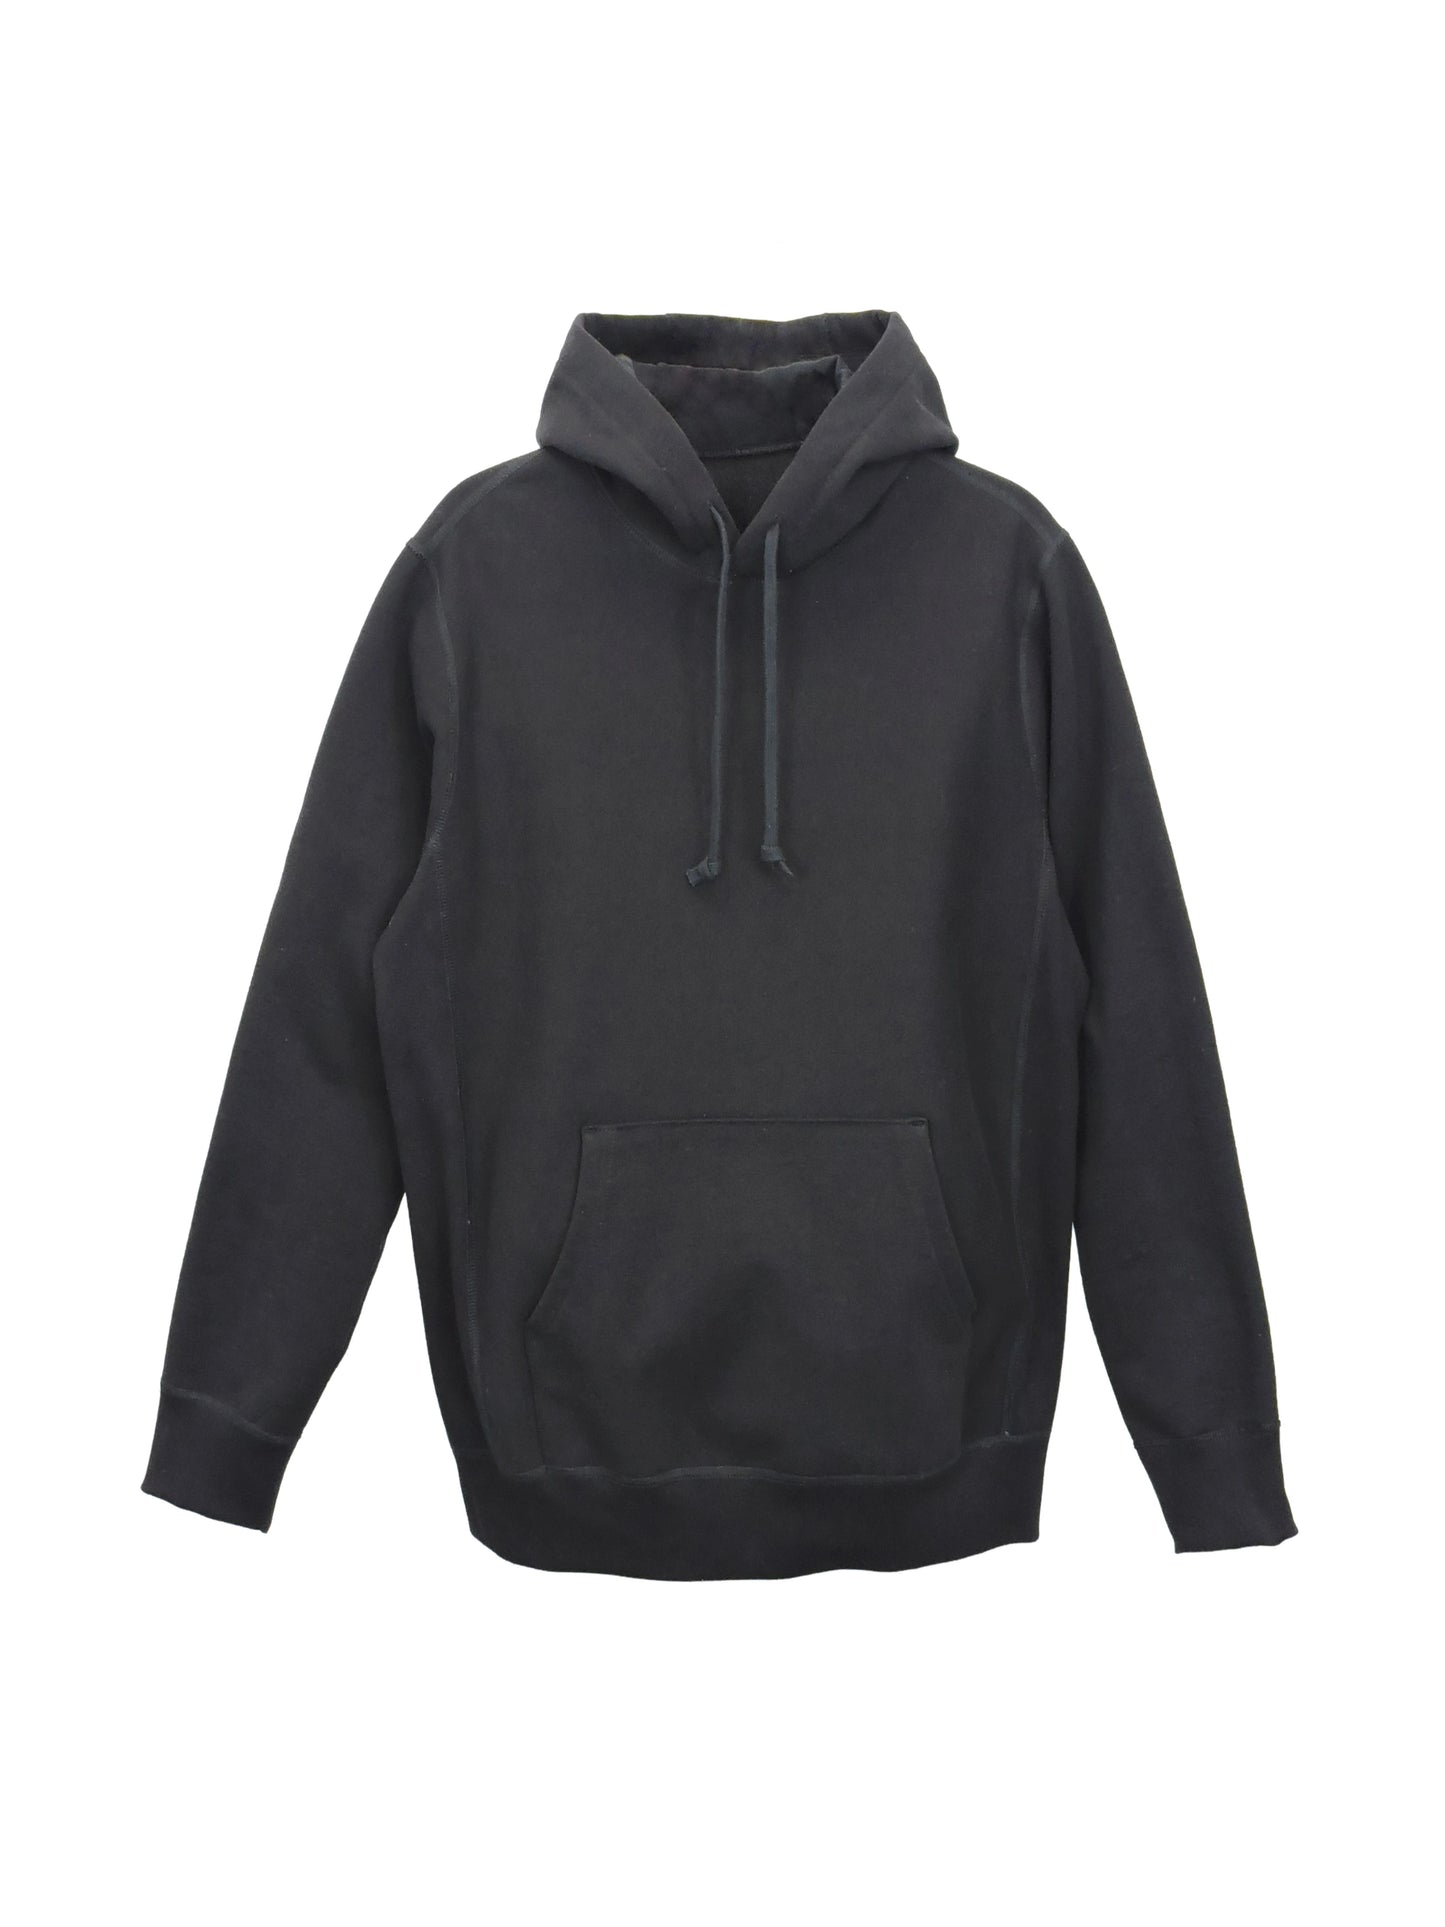 Black Hoodie in Smooth French Terry 